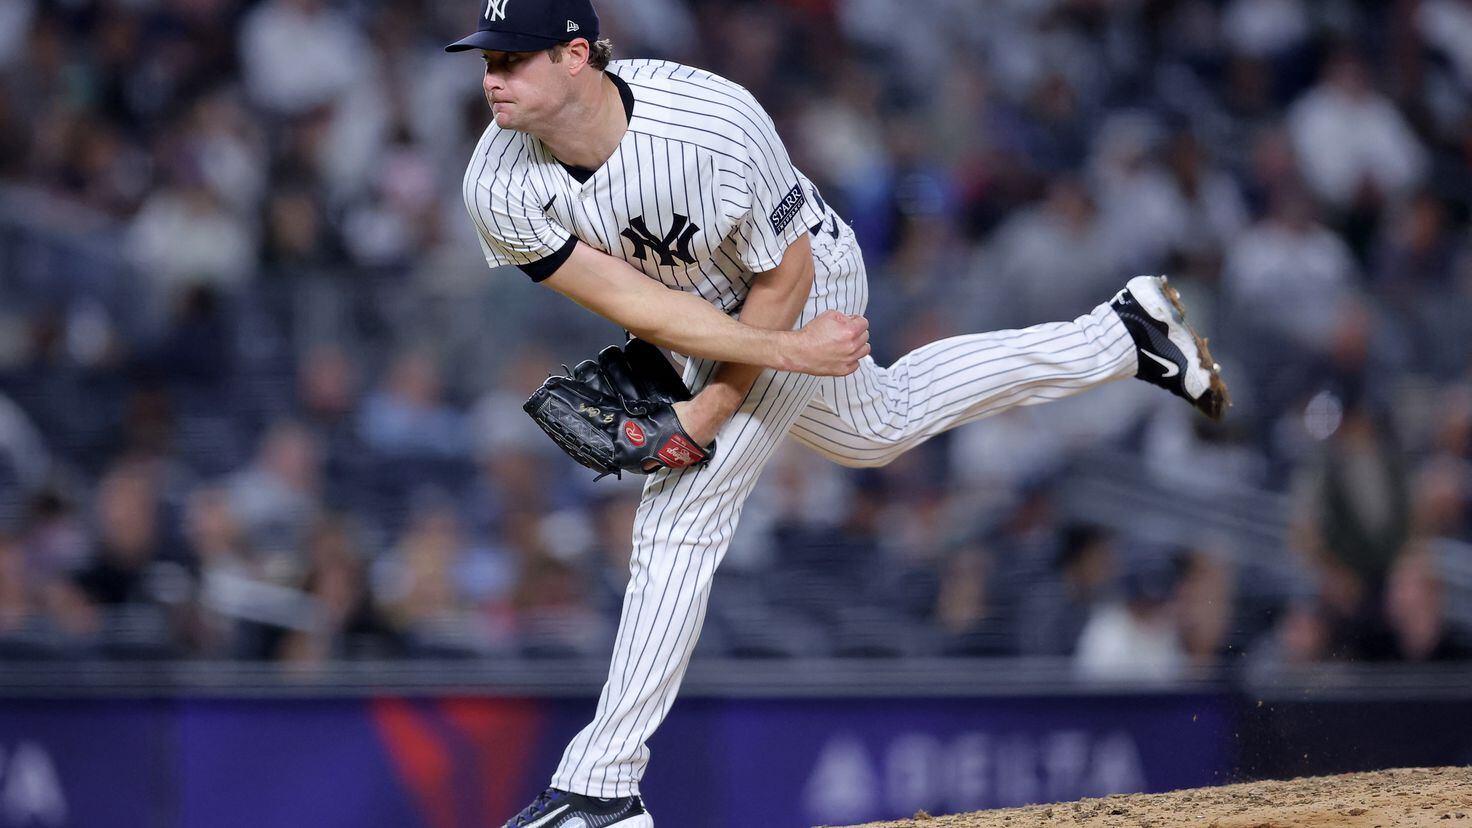 Yankees' Gerrit Cole ties Ron Guidry for single-season strikeout record